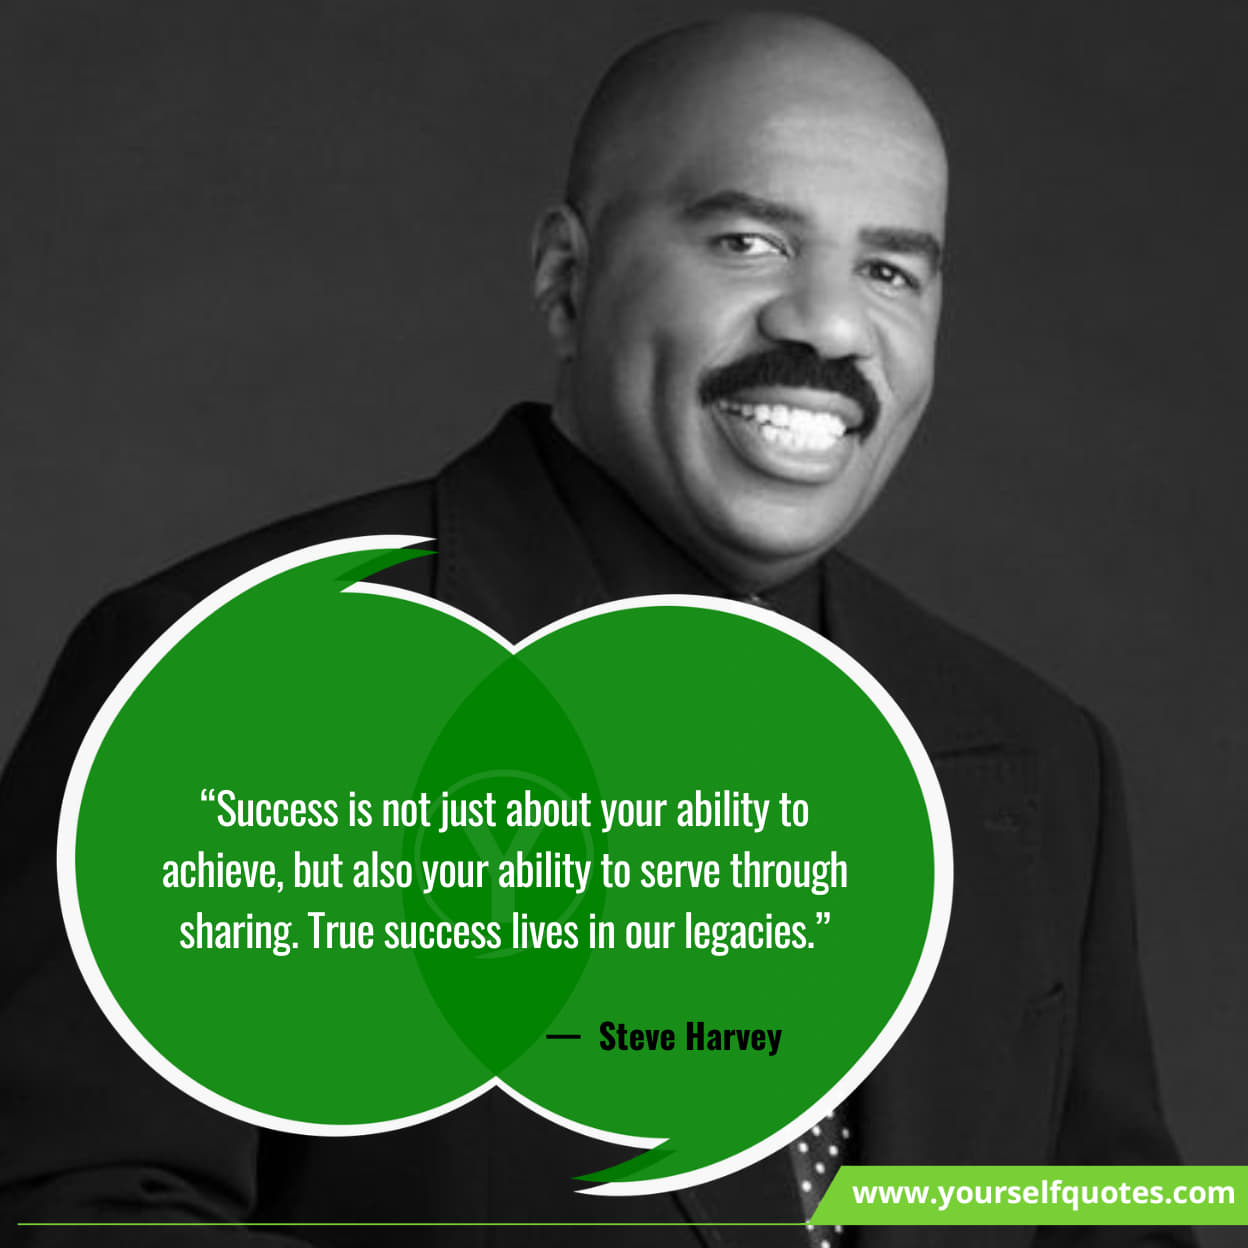 Steve Harvey Quotes On Success & Life